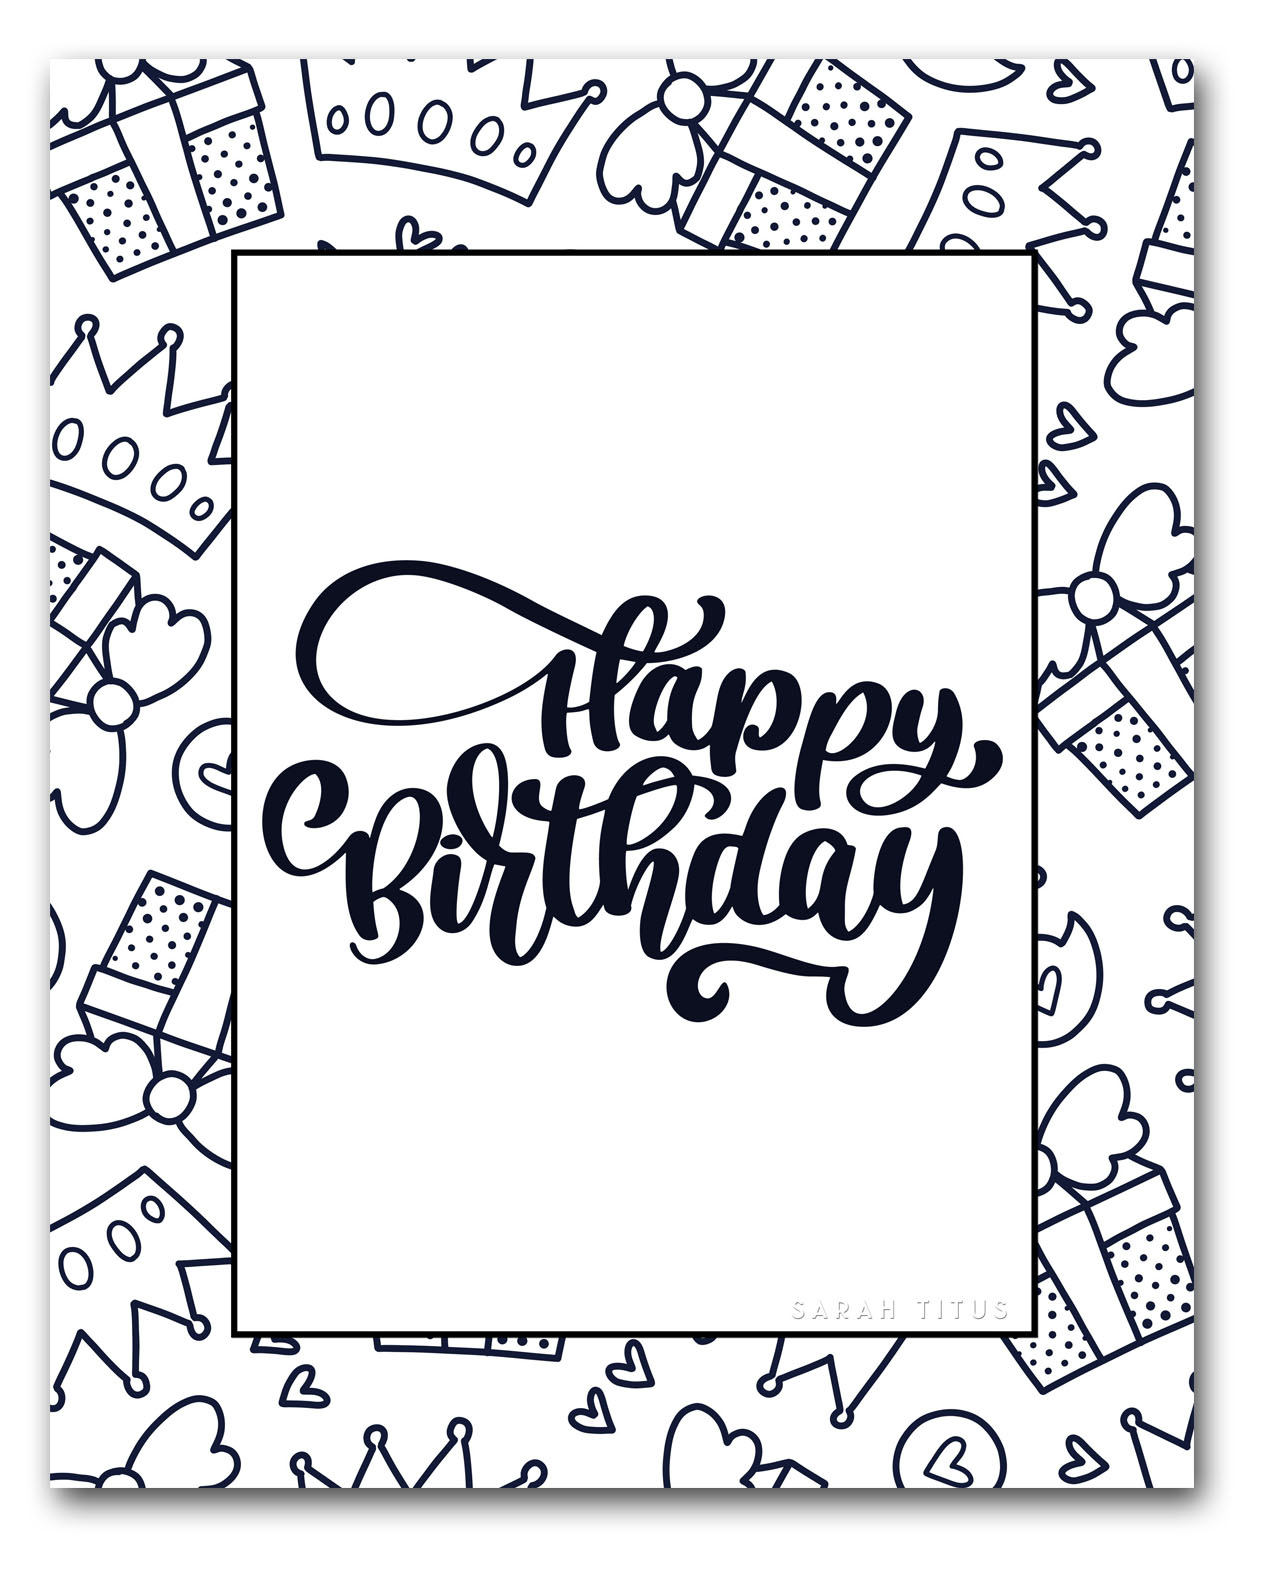 Happy Birthday Cards Printable To Color